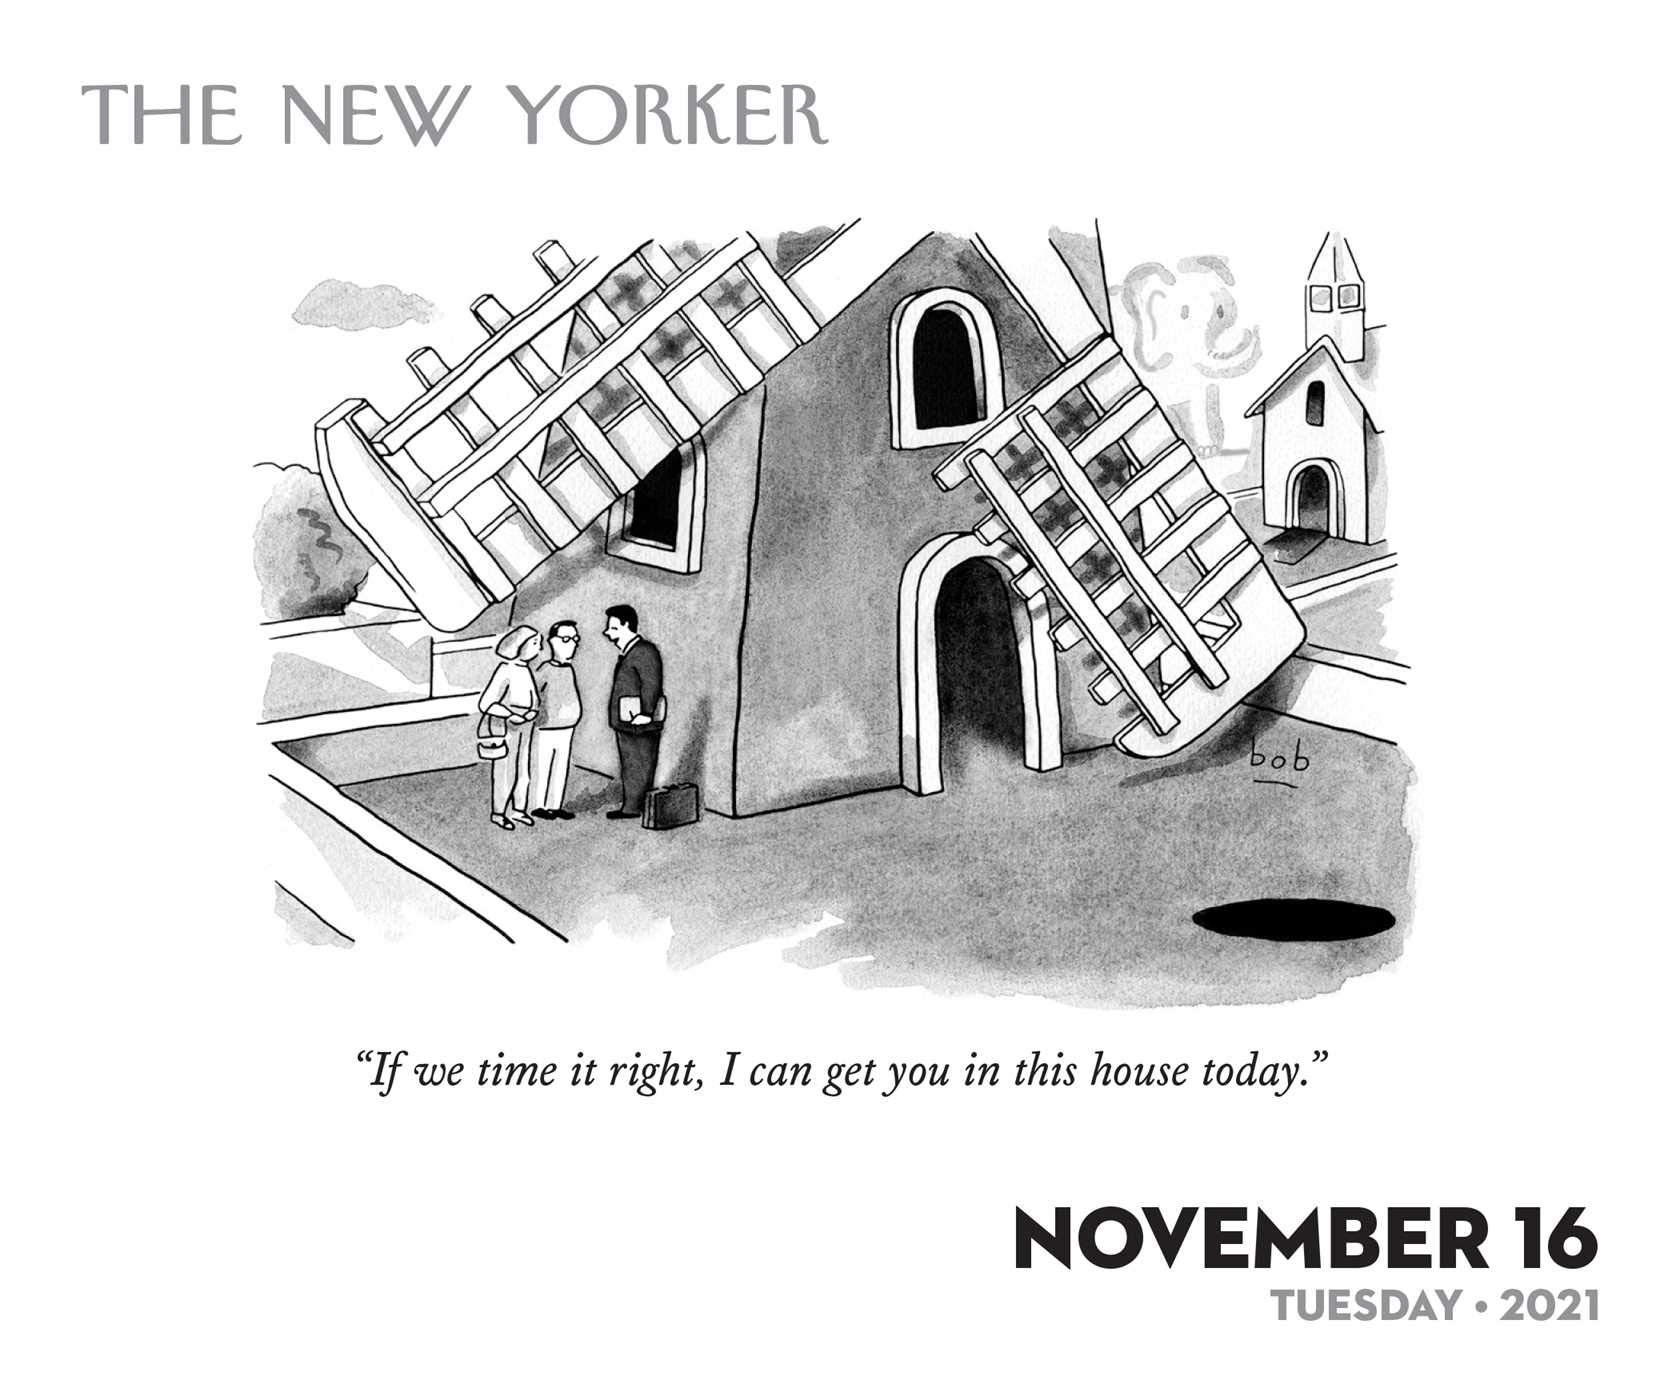 Cartoons from The New Yorker 2021 Day-to-Day Calendar